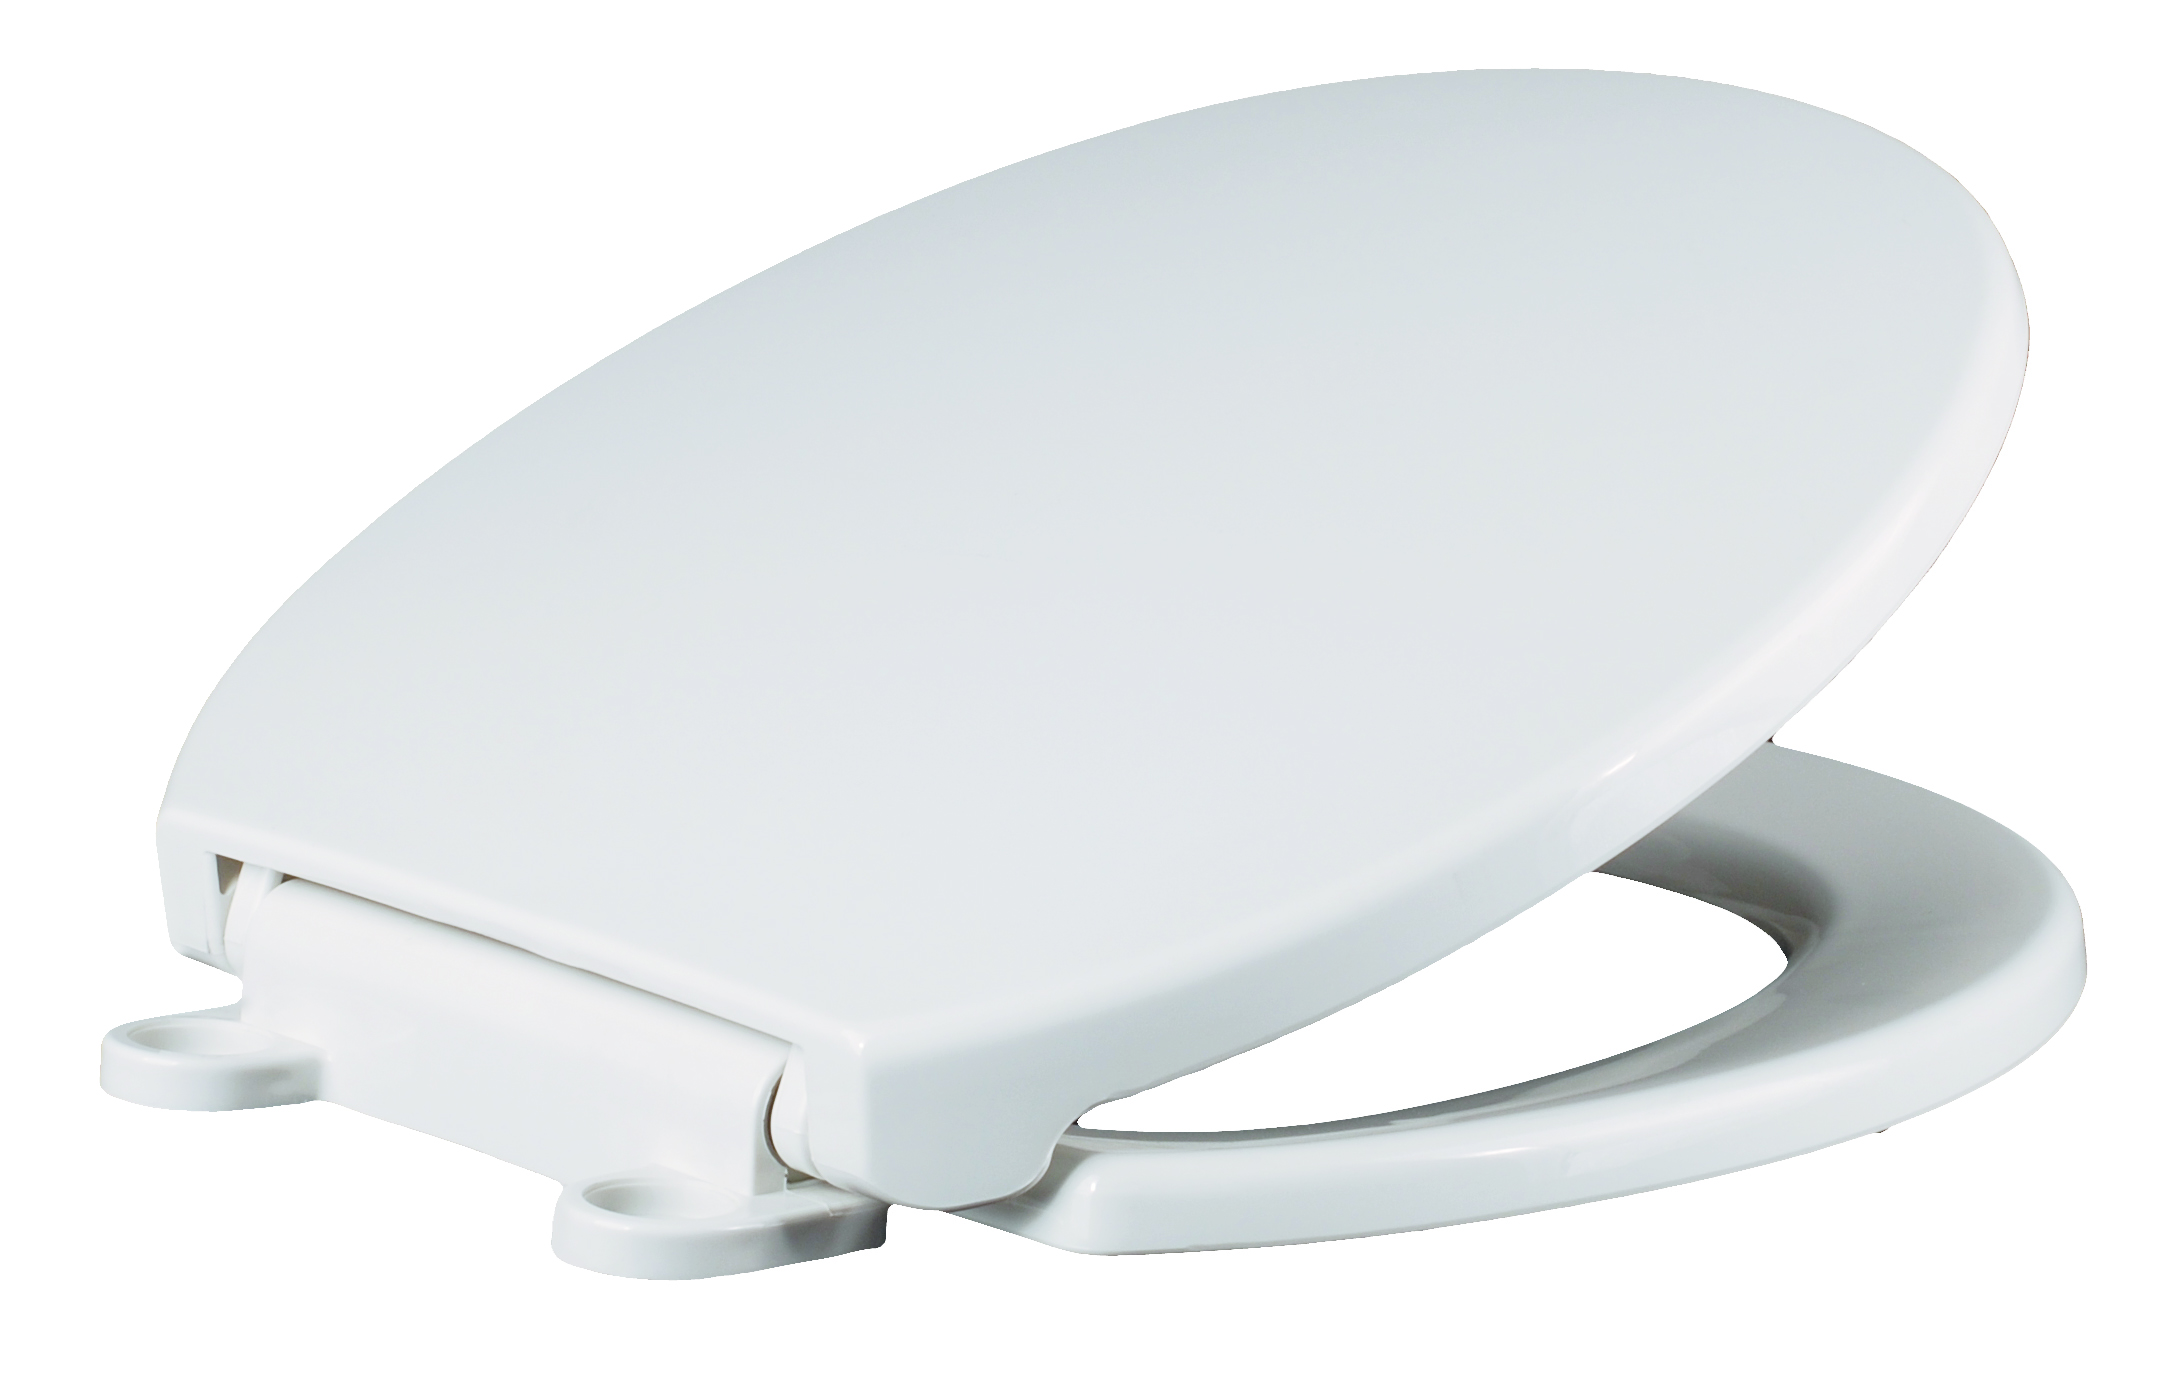 American Standard Plastic Toilet Seat Cover in Round Shape